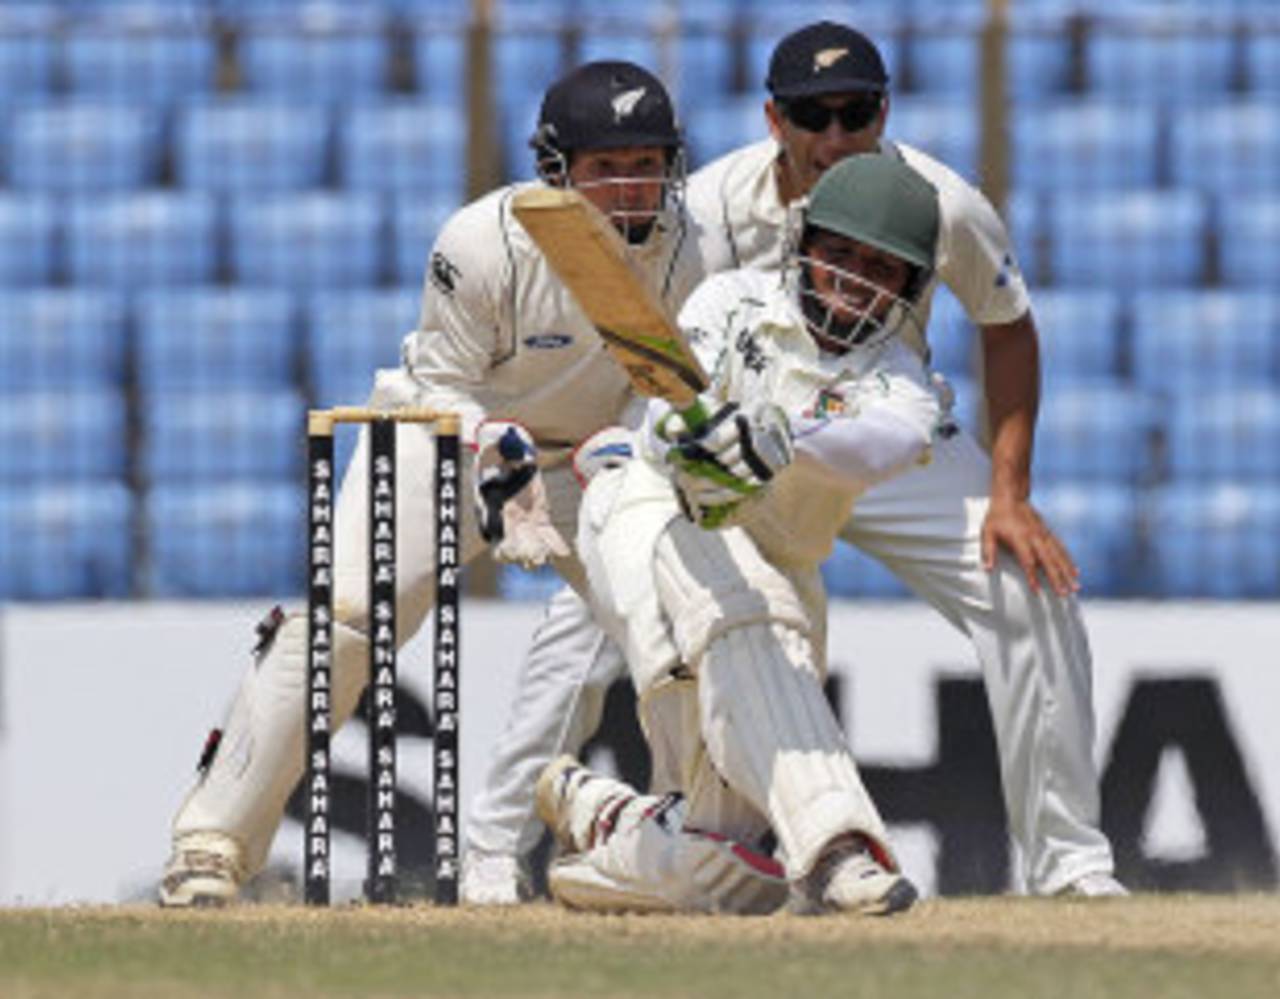 Mominul Haque goes for the slog, Bangladesh v New Zealand, 1st Test, Chittagong, 3rd day, October 11, 2013